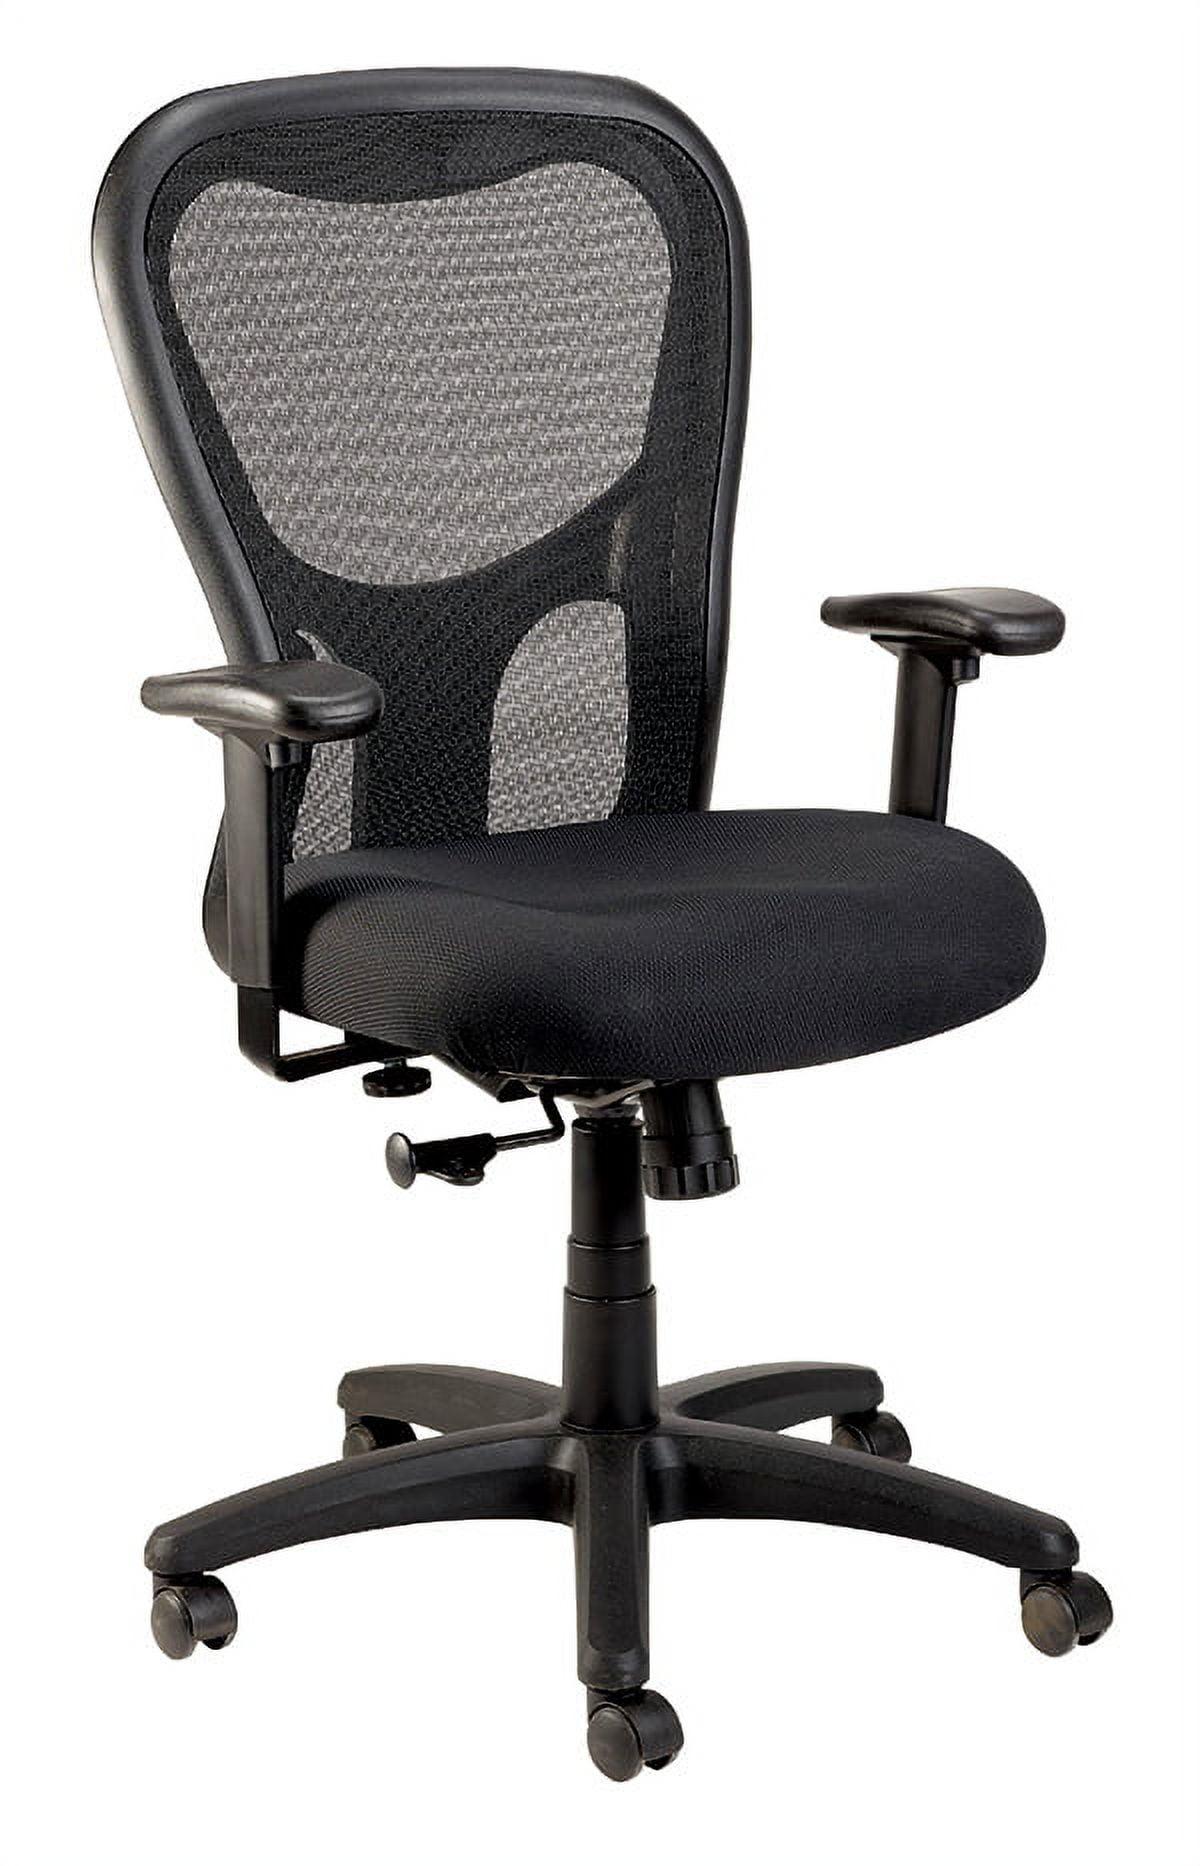 Apollo Synchro High-Back Adjustable Mesh and Leather Task Chair in Black